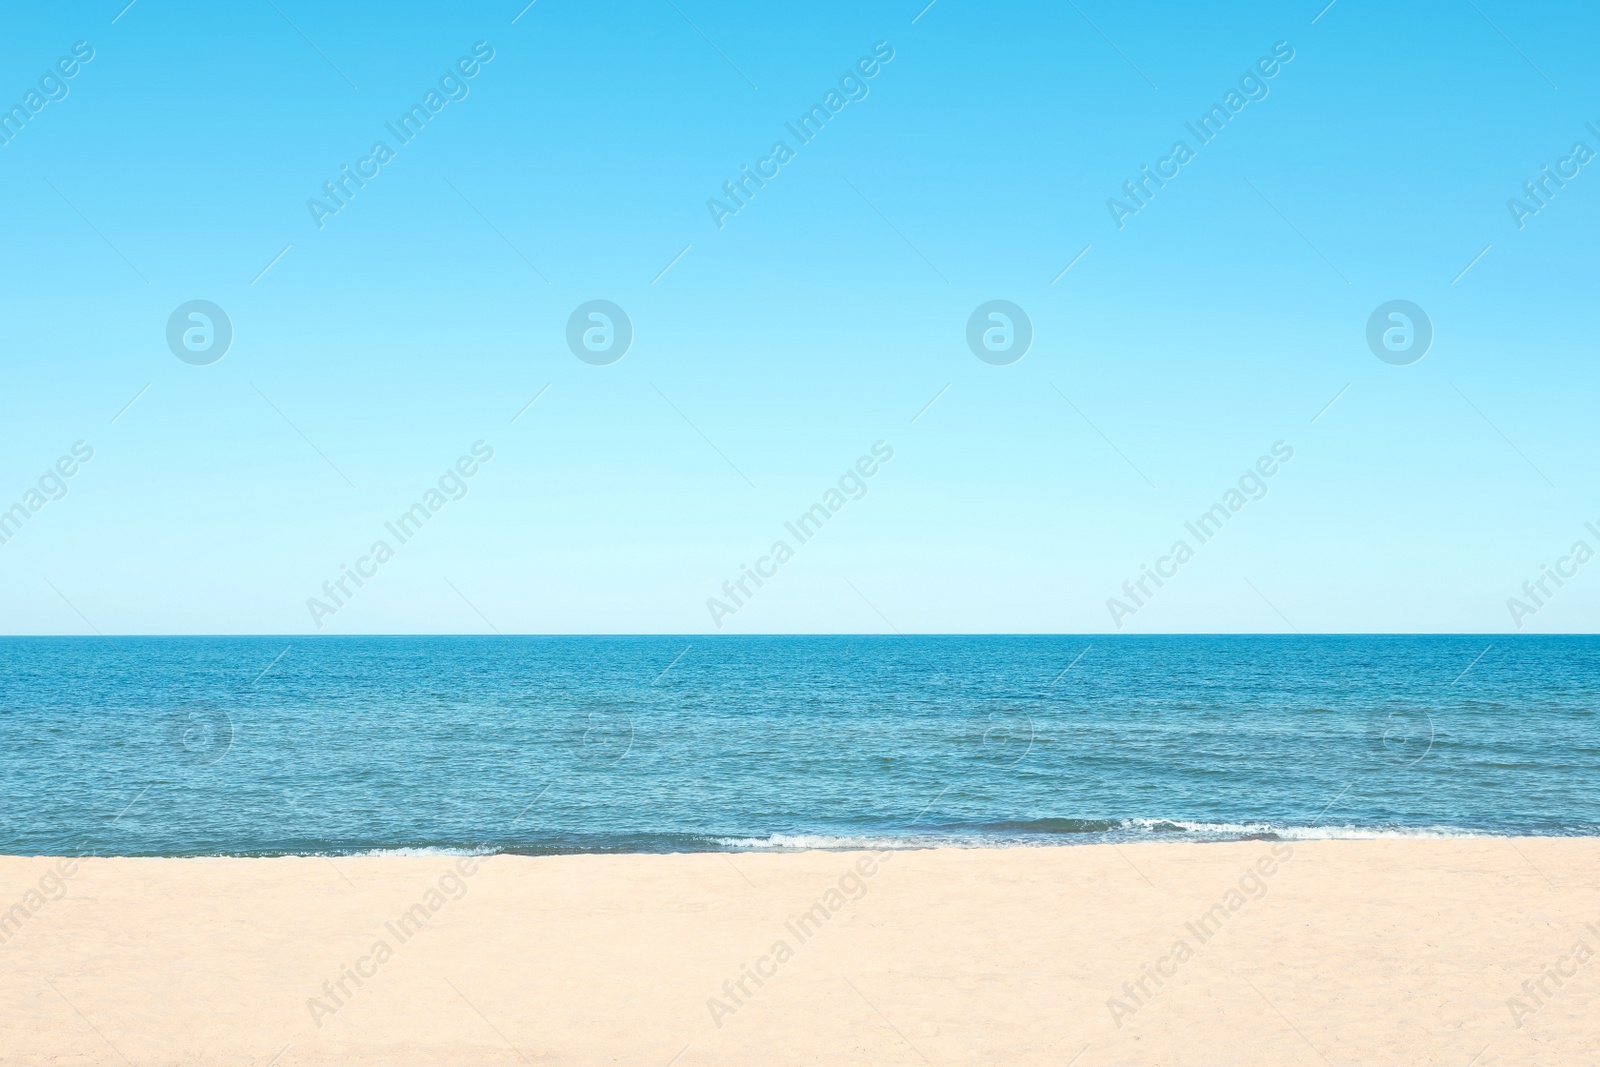 Photo of Picturesque view of sandy beach with seagulls near sea